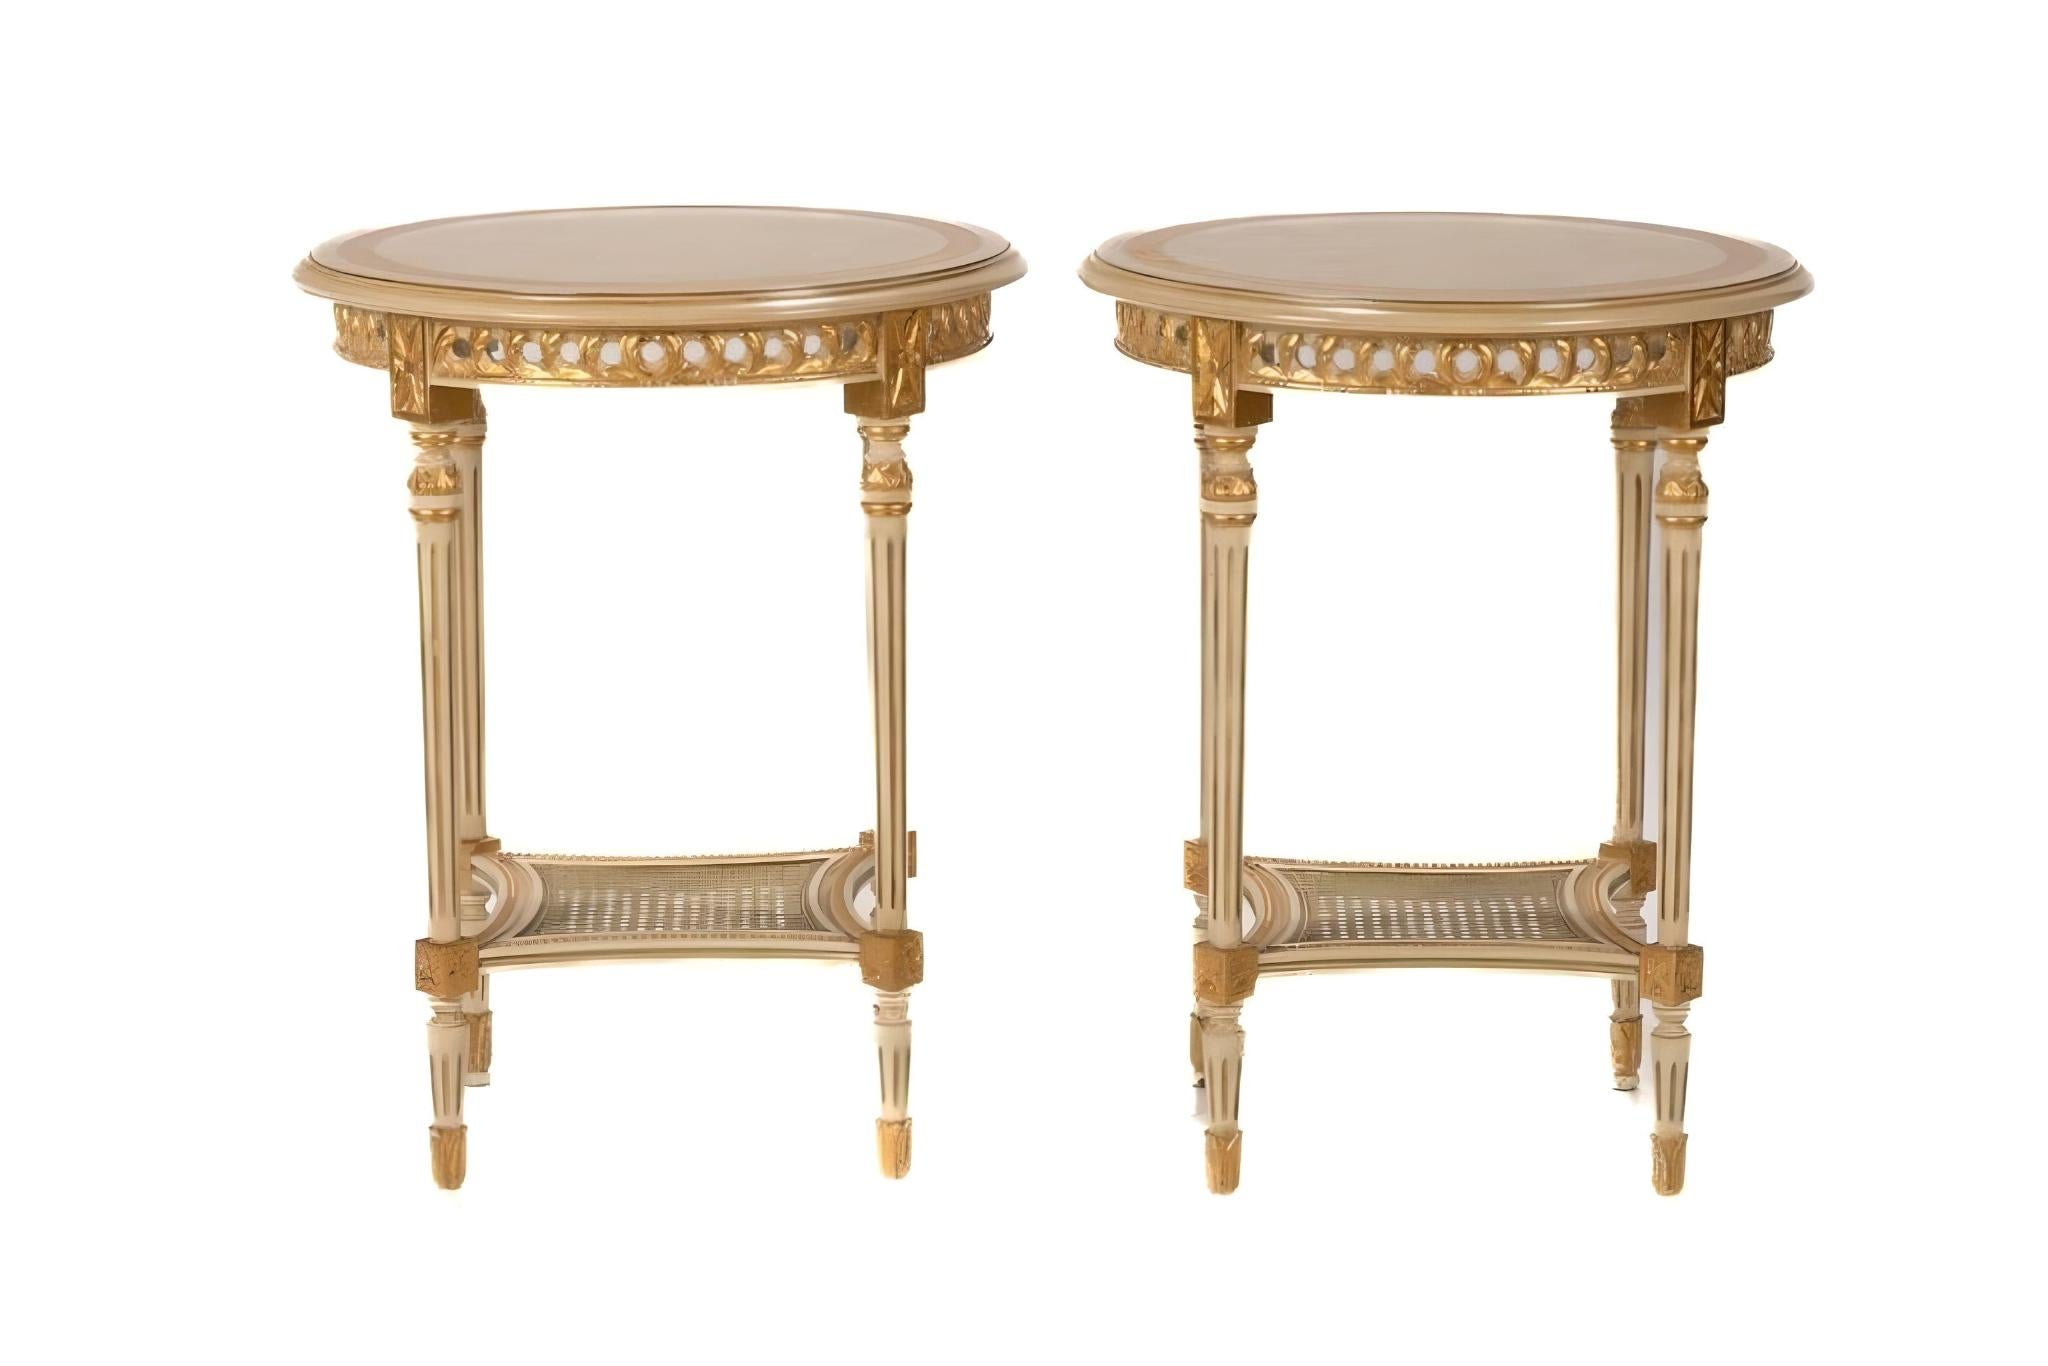 A pair of Italian circular side tables painted in white with gilded accents. Tables in good condition with little marks consistent with age.

Height: 26 1/2